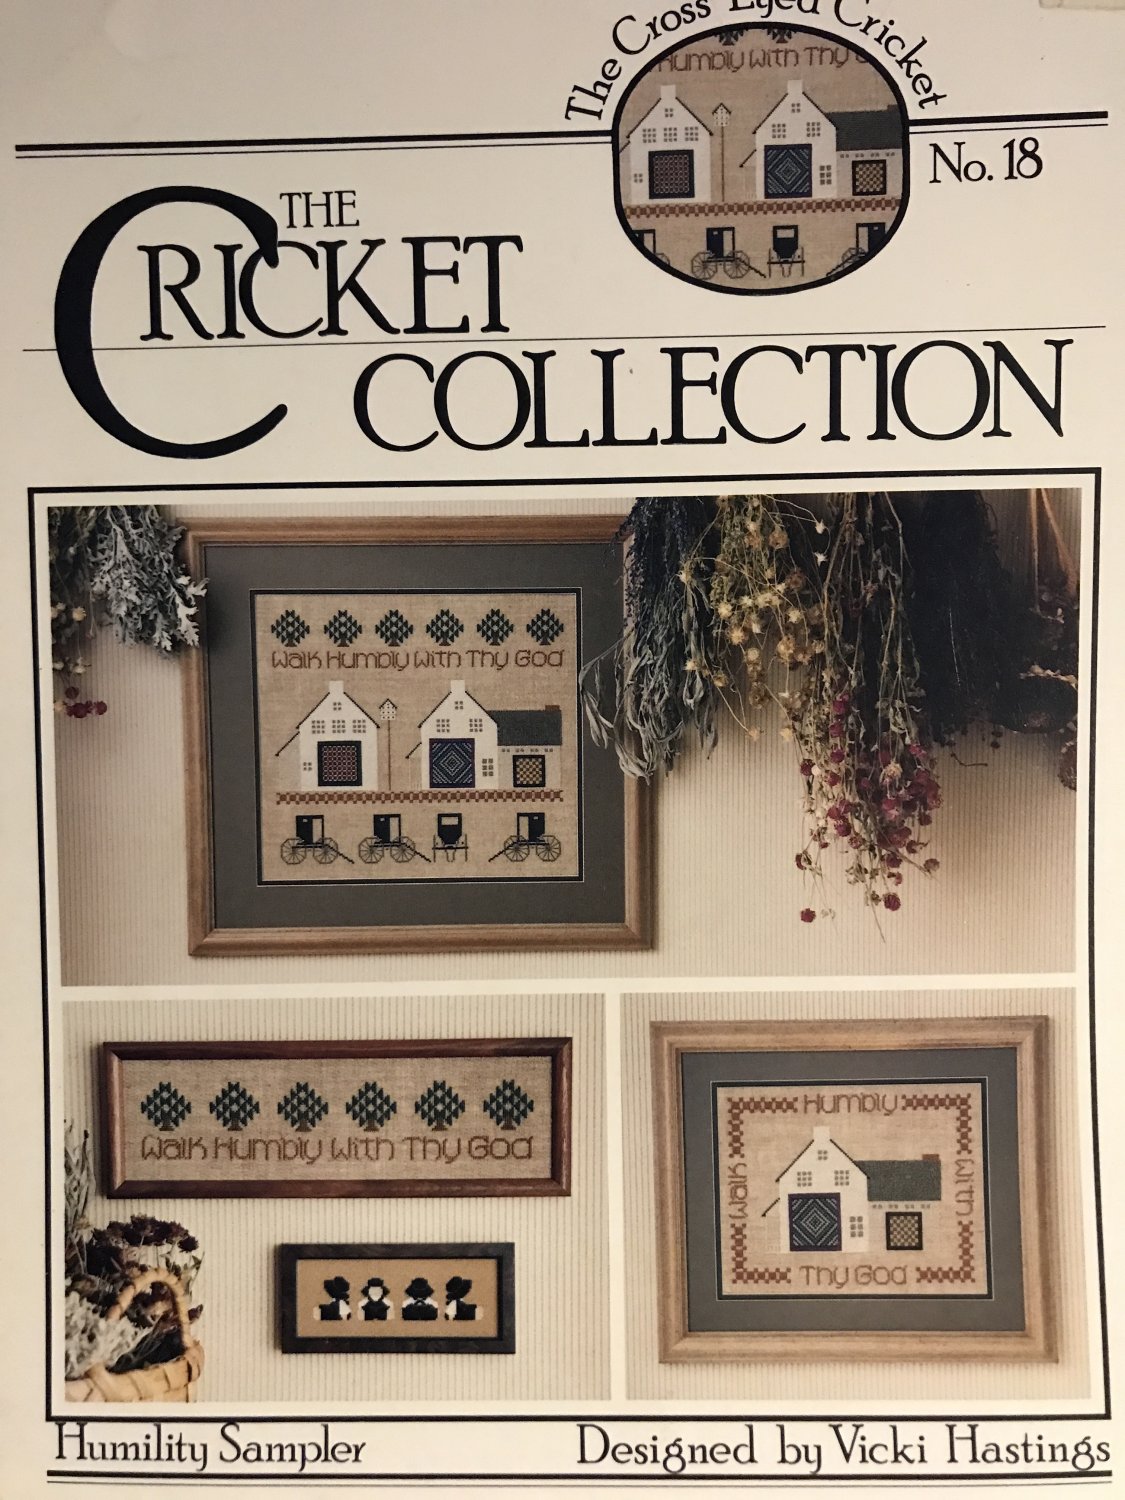 The Cricket Collection Cross Stitch Pattern Humility Sampler No. 18 Amish theme